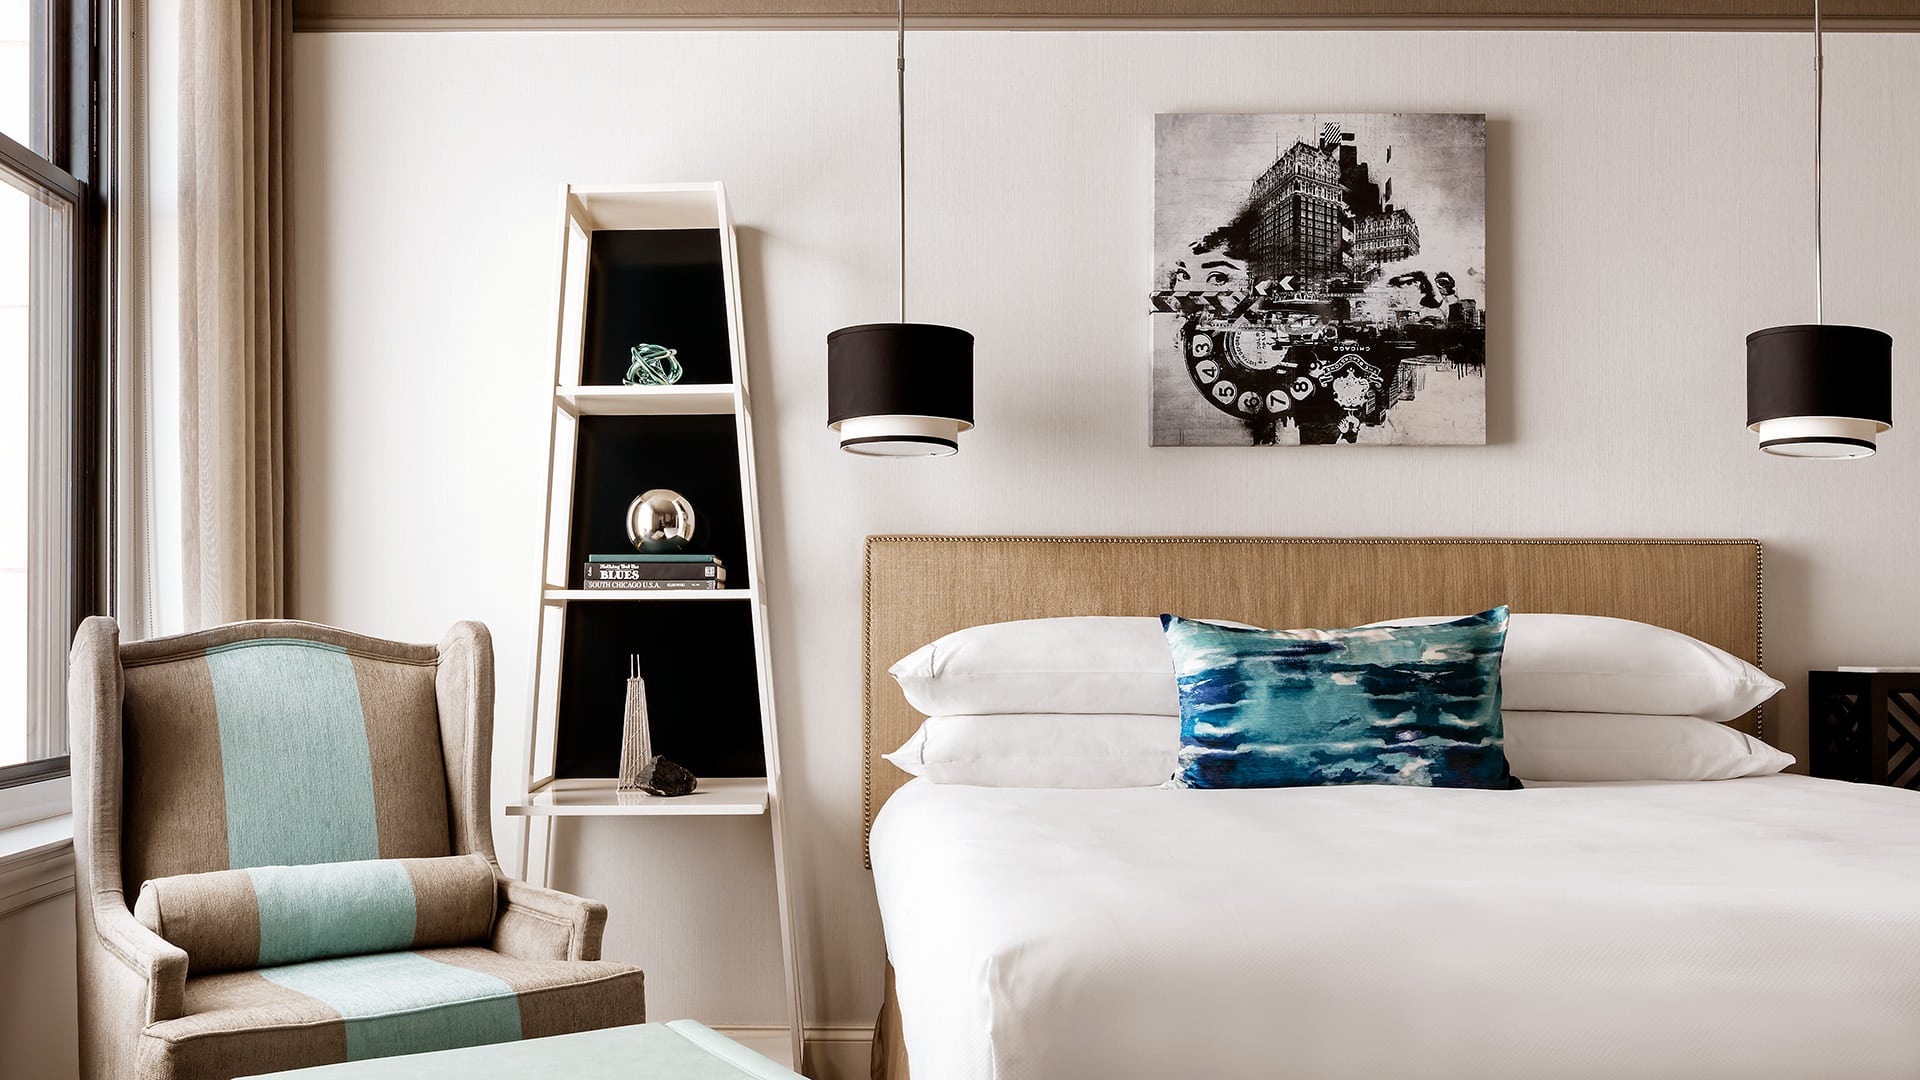 a bed, chair, shelf, and other decor accents in a room at The Blackstone, Autograph Collection